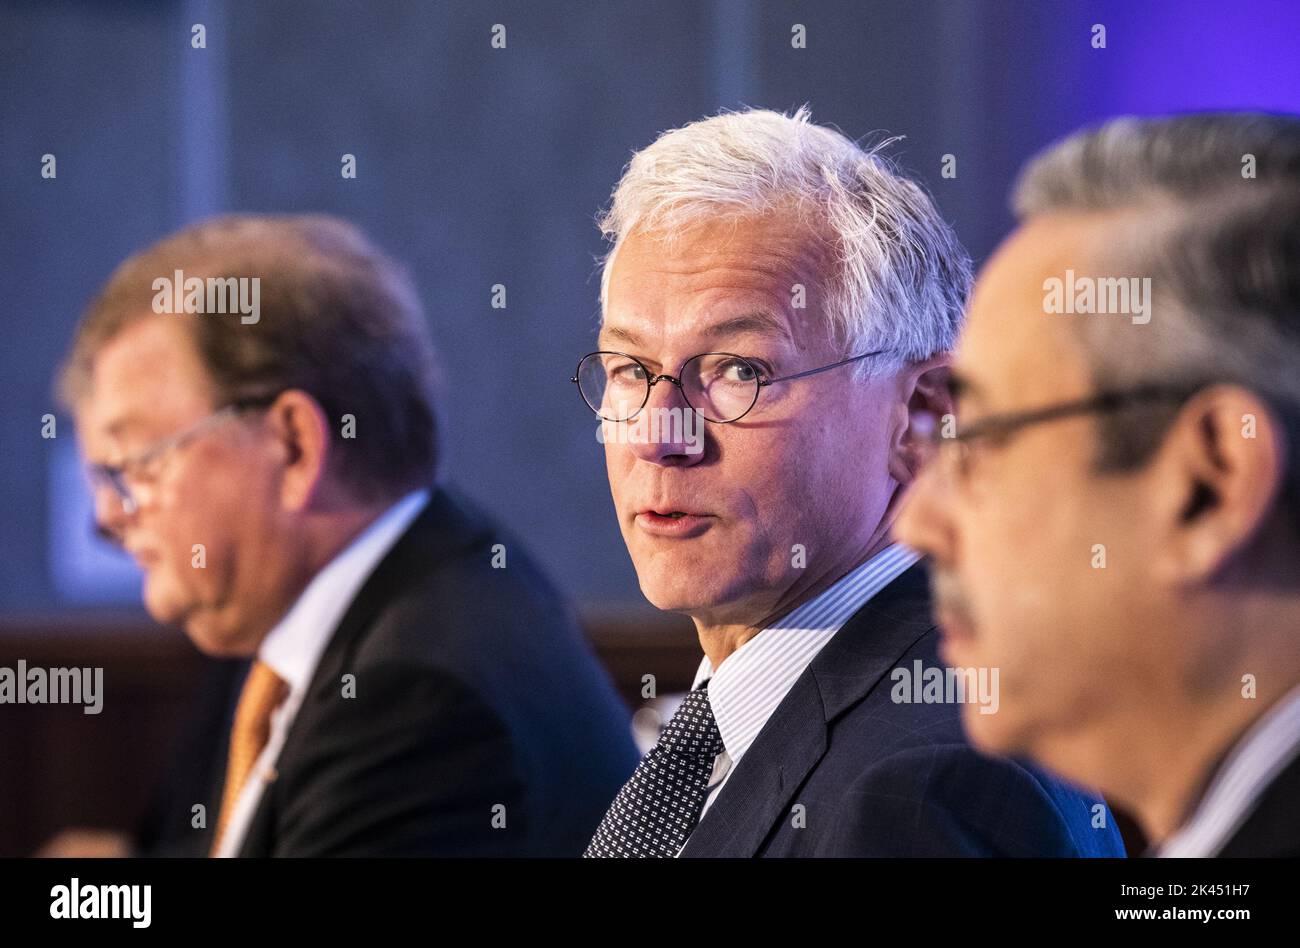 2022-09-30 09:23:39 AMSTERDAM - Former CEO Frans van Houten of Koninklijke Philips NV before the start of an extraordinary shareholders' meeting of Philips. ANP EVA PLEVIER netherlands out - belgium out Stock Photo